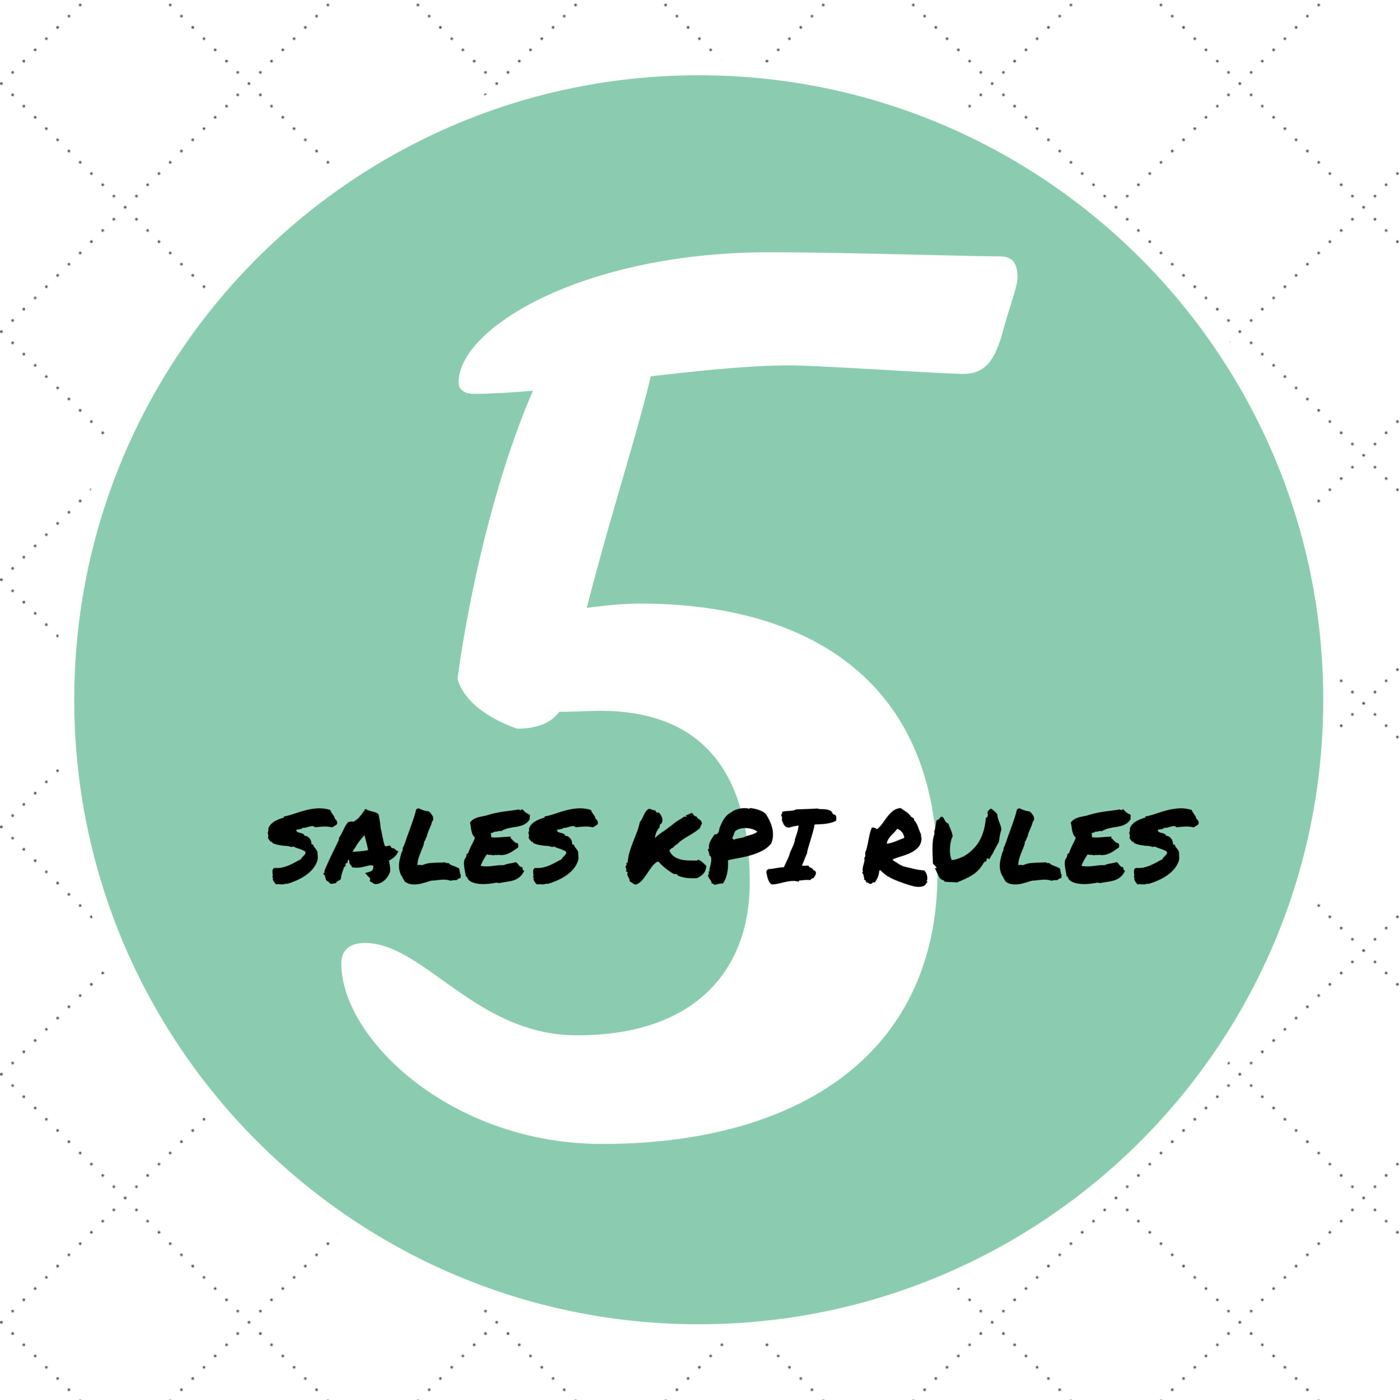 5 Sales KPI Rules to Live By